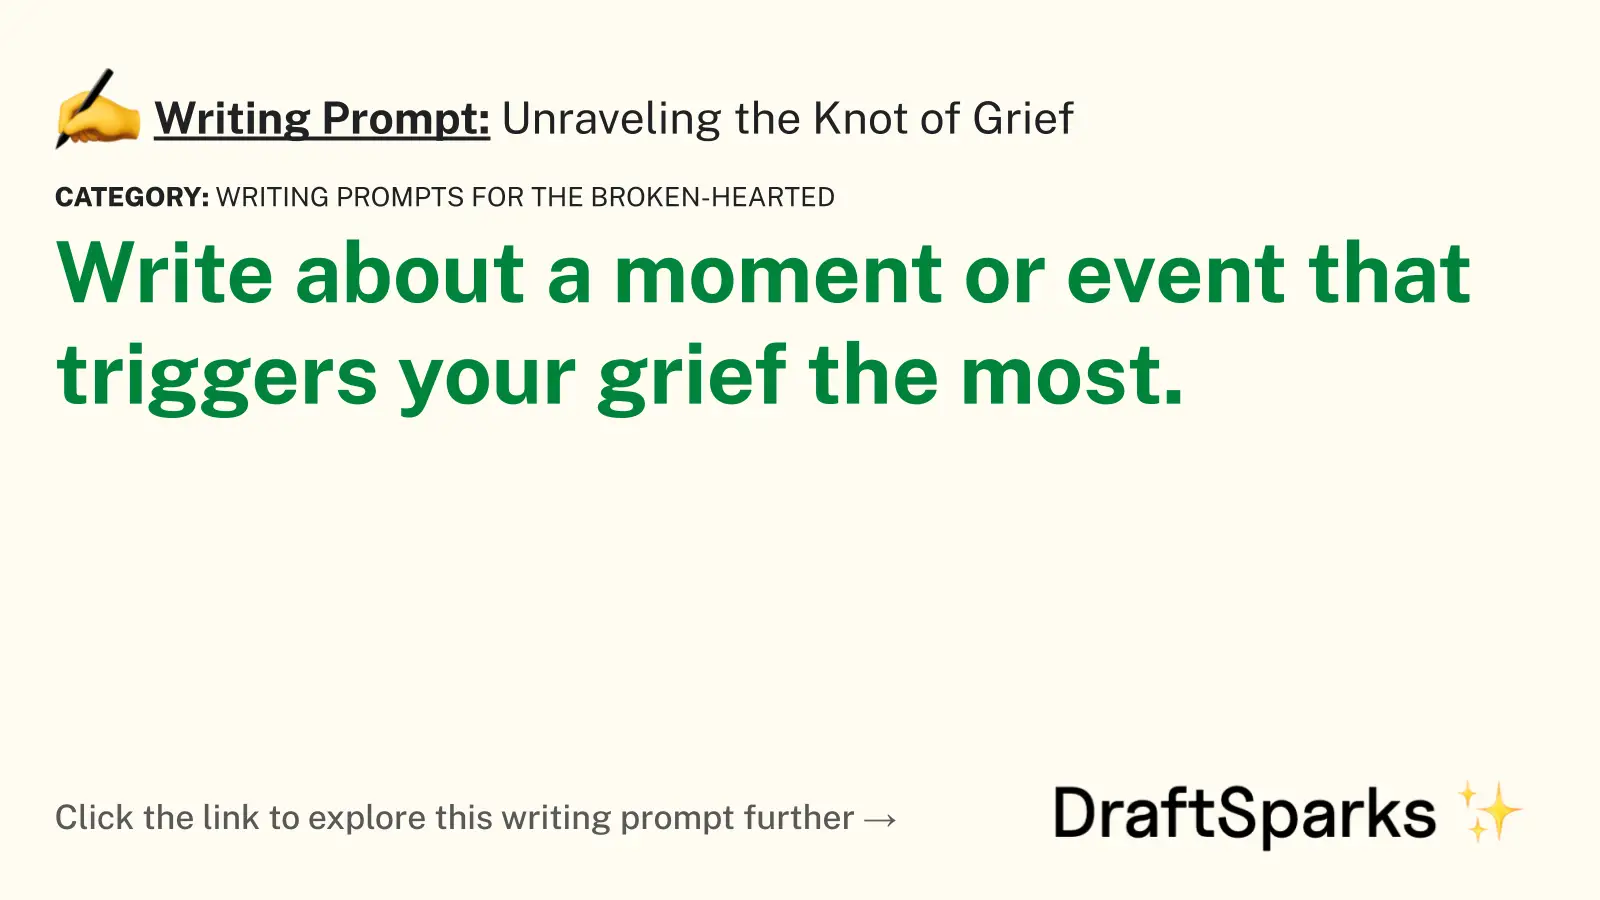 Unraveling the Knot of Grief